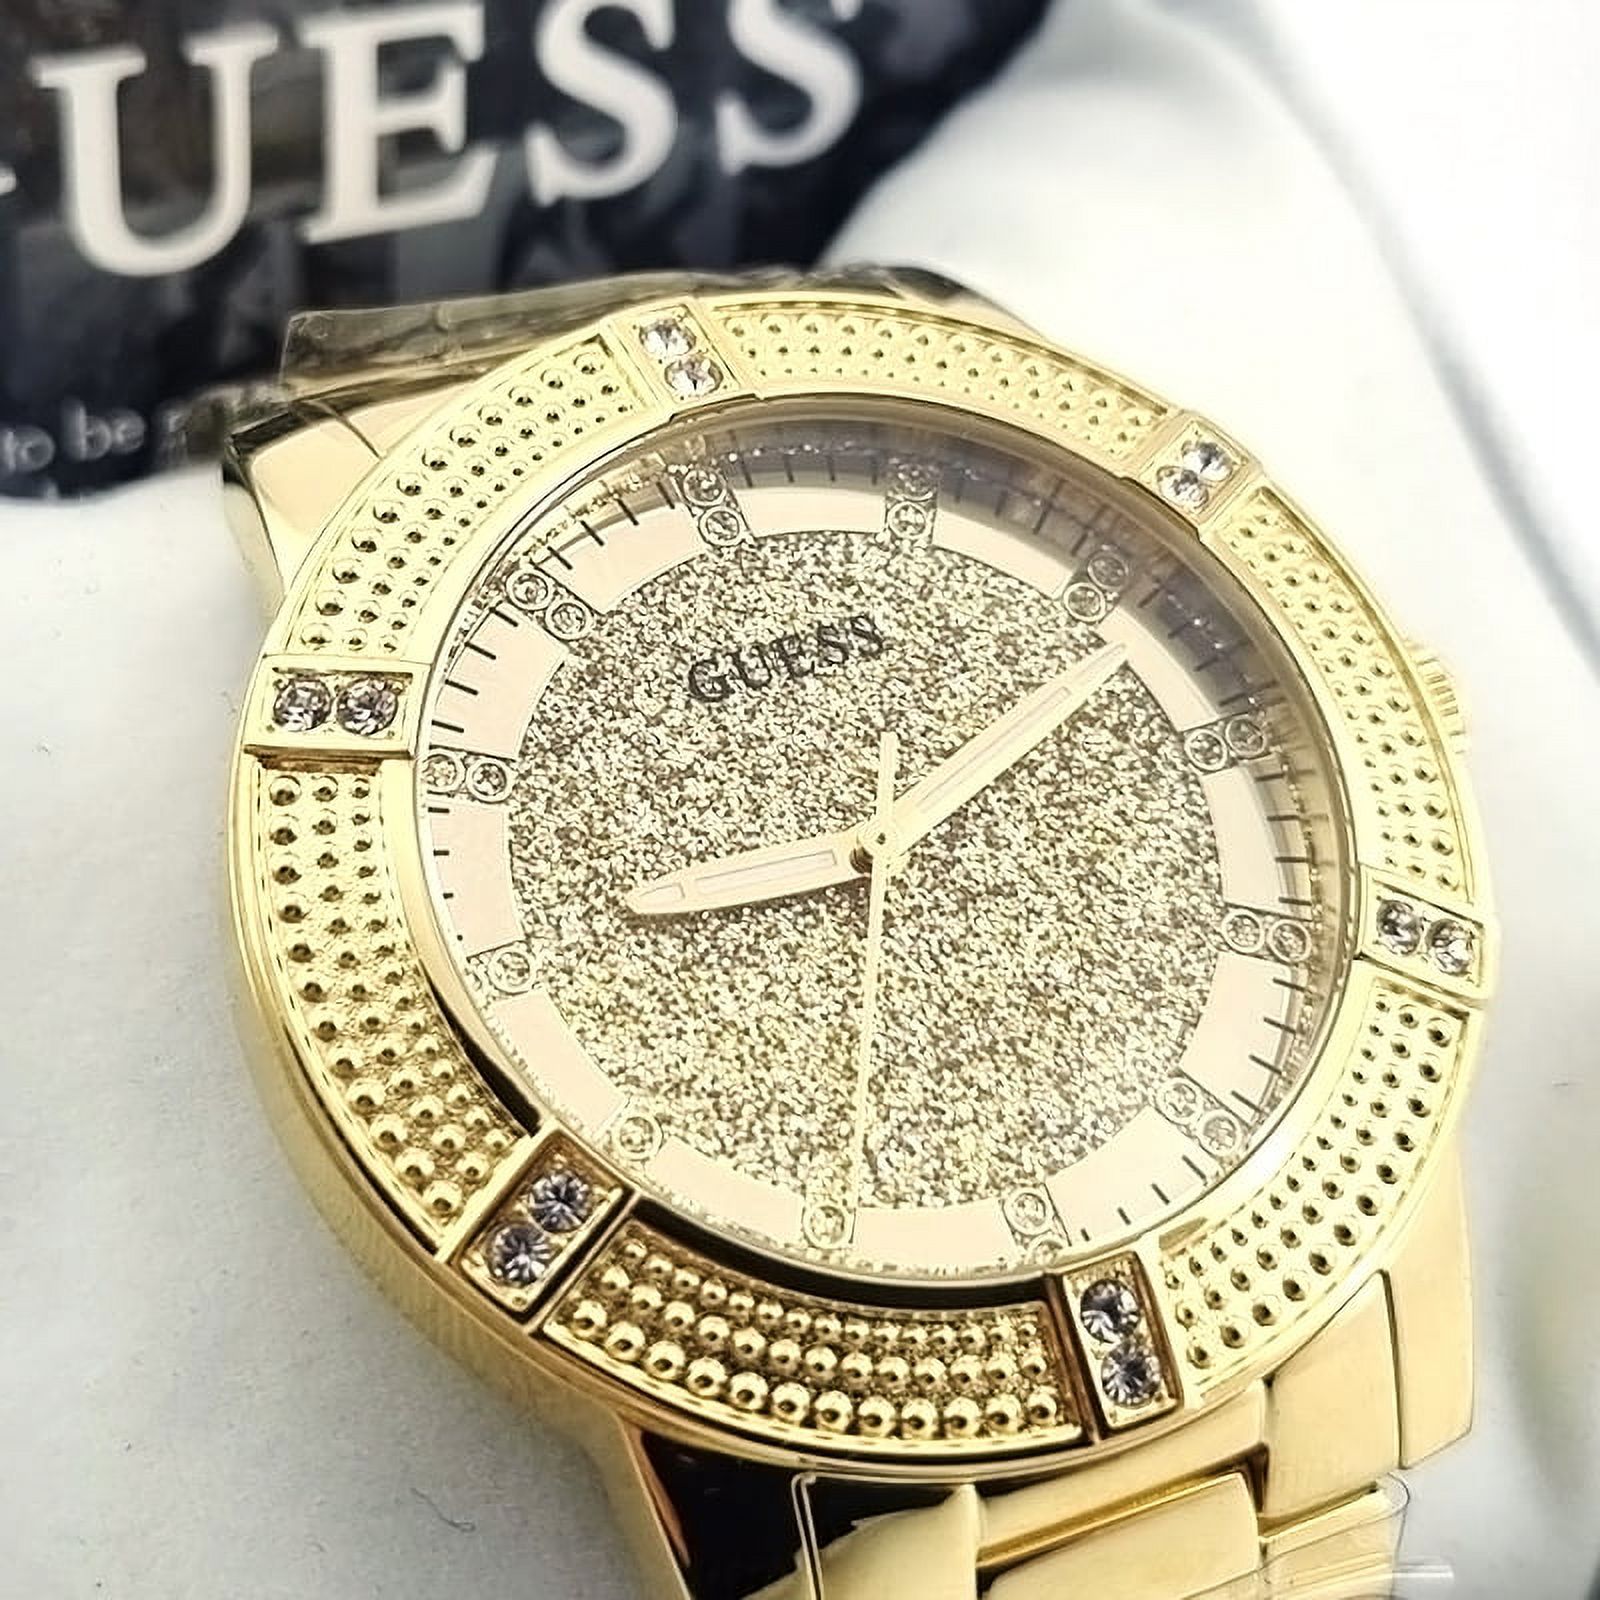 GUESS Gold-Tone Stainless Steal Analog Watch U1347L2 - image 1 of 3